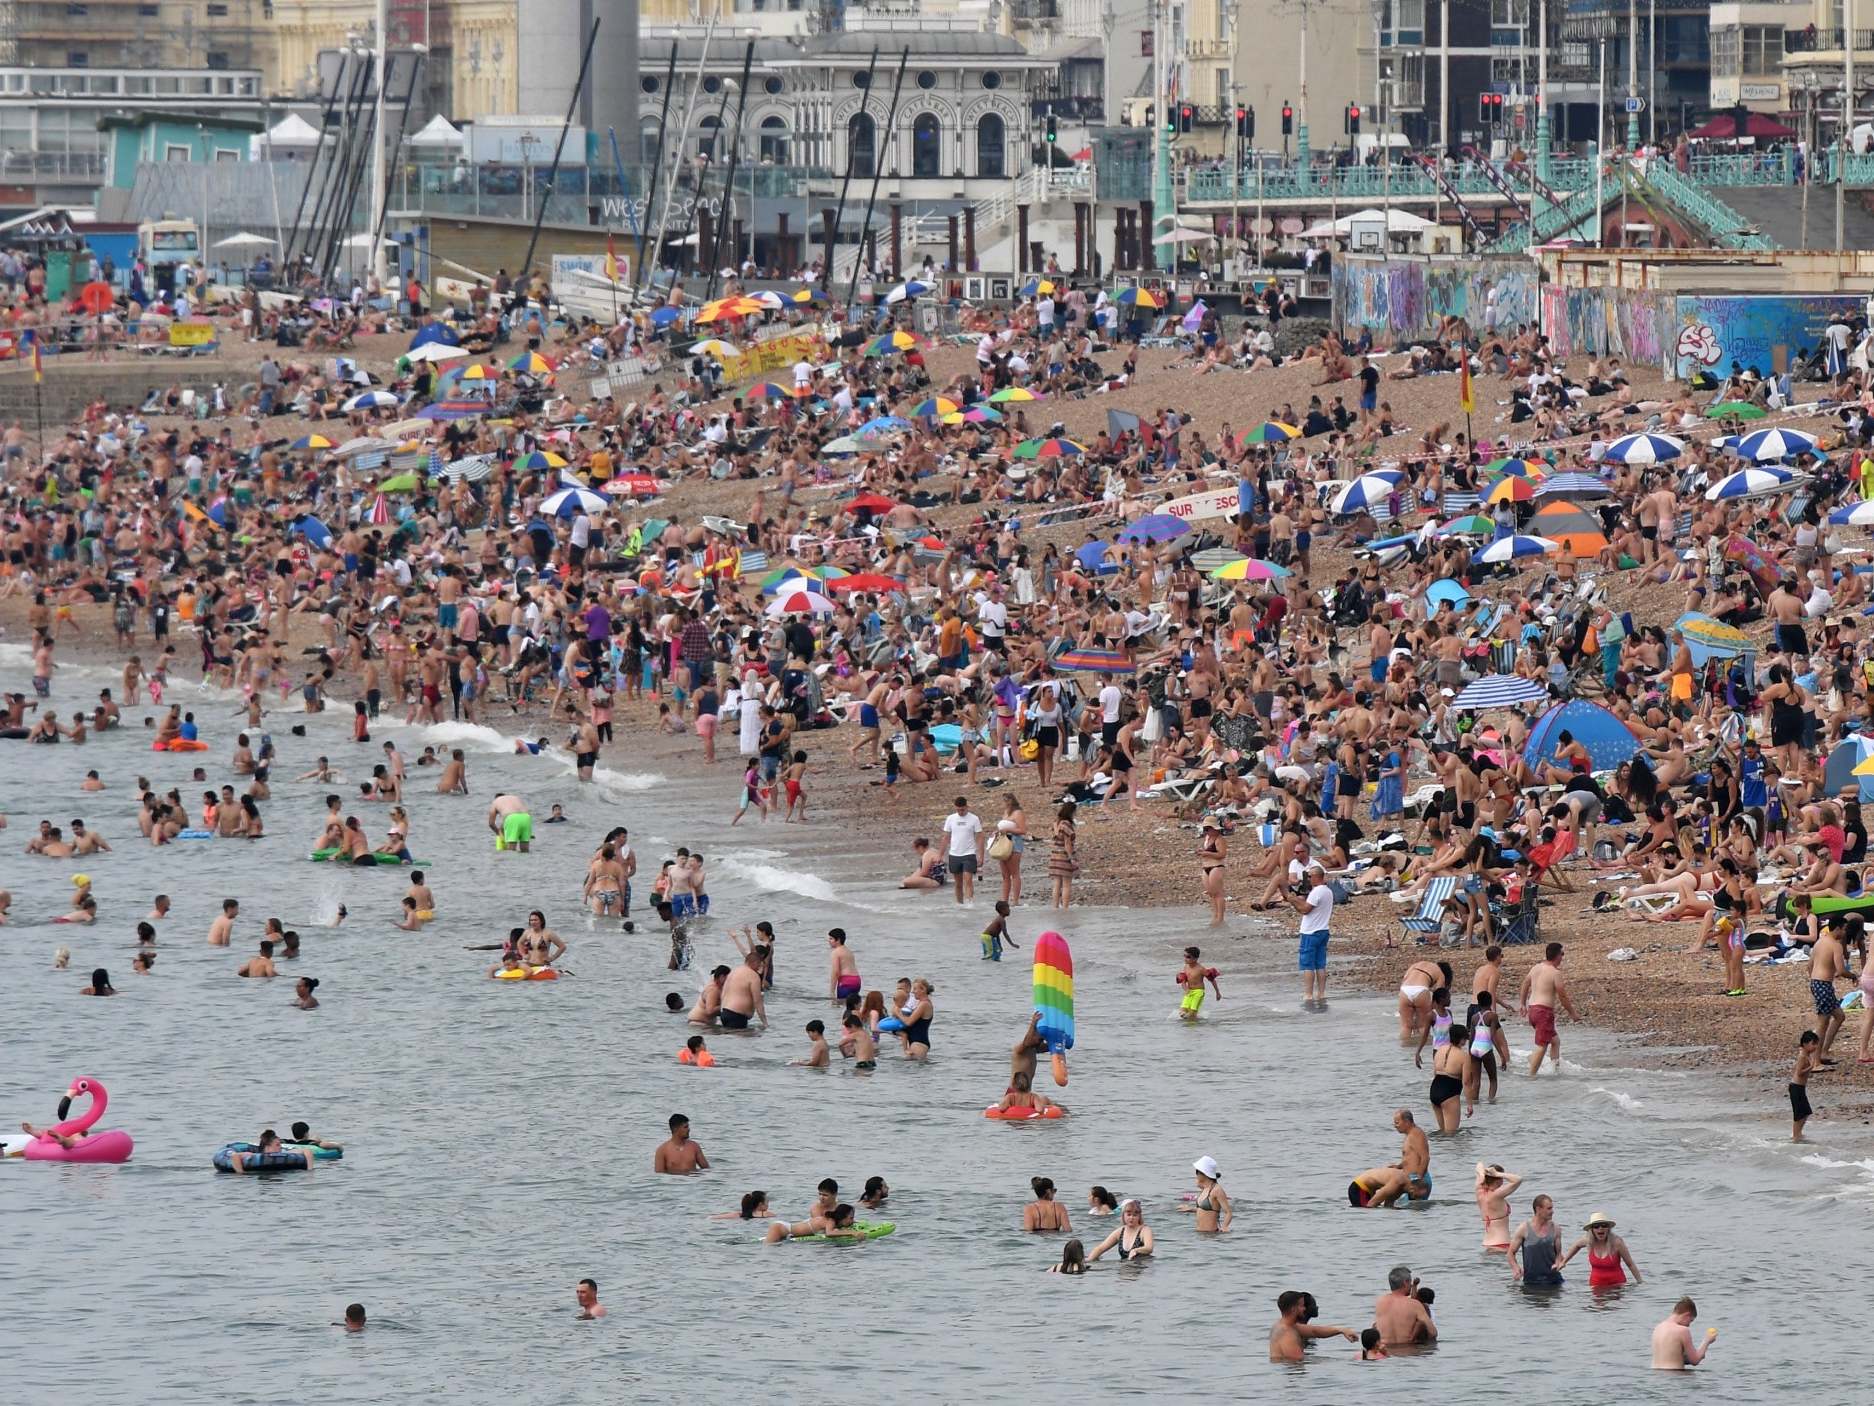 Brighton beach is packed as the south of England basks in a summer heatwave (Images)